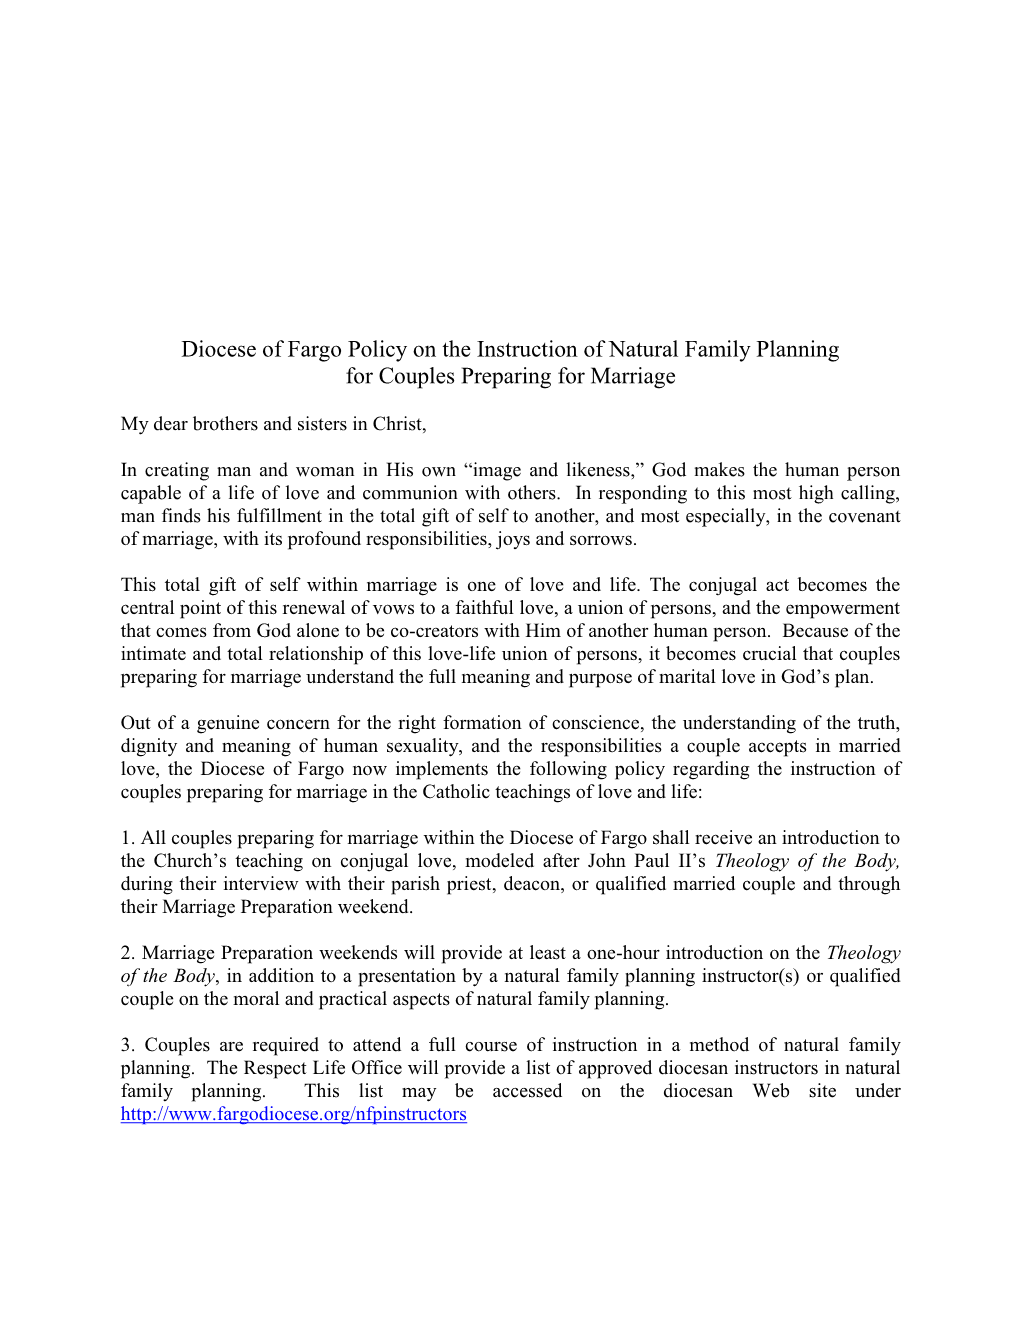 Policy on the Instruction of Natural Family Planning for Couples Preparing for Marriage